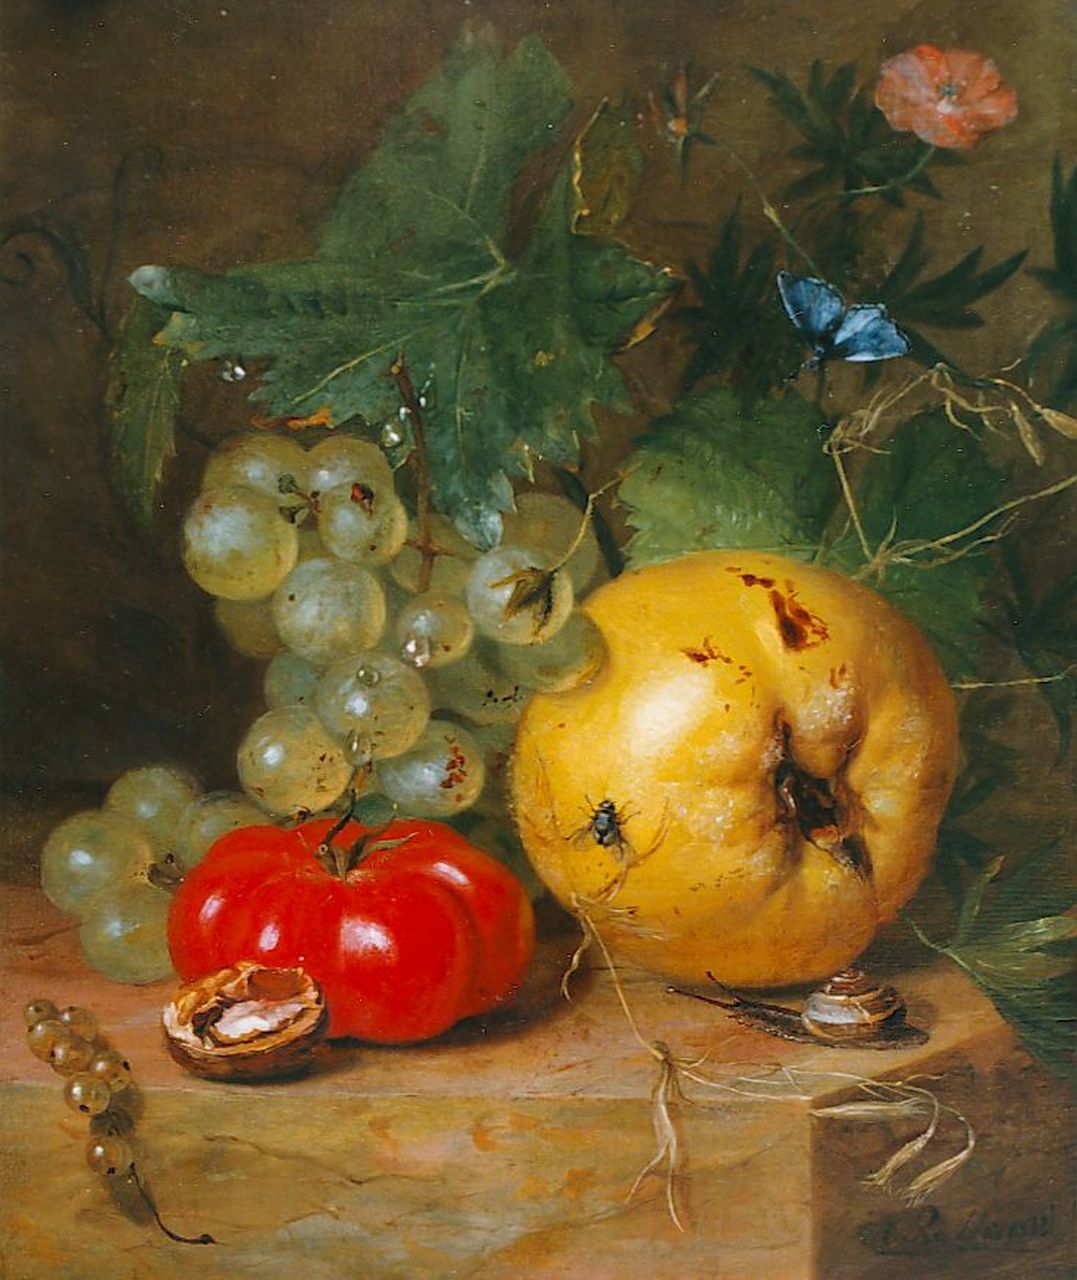 Reekers sr. H.  | Hendrik Reekers sr., A still life with grapes, flowers,a tomato and a snail, oil on panel 25.9 x 21.8 cm, signed l.r. and dated 1833